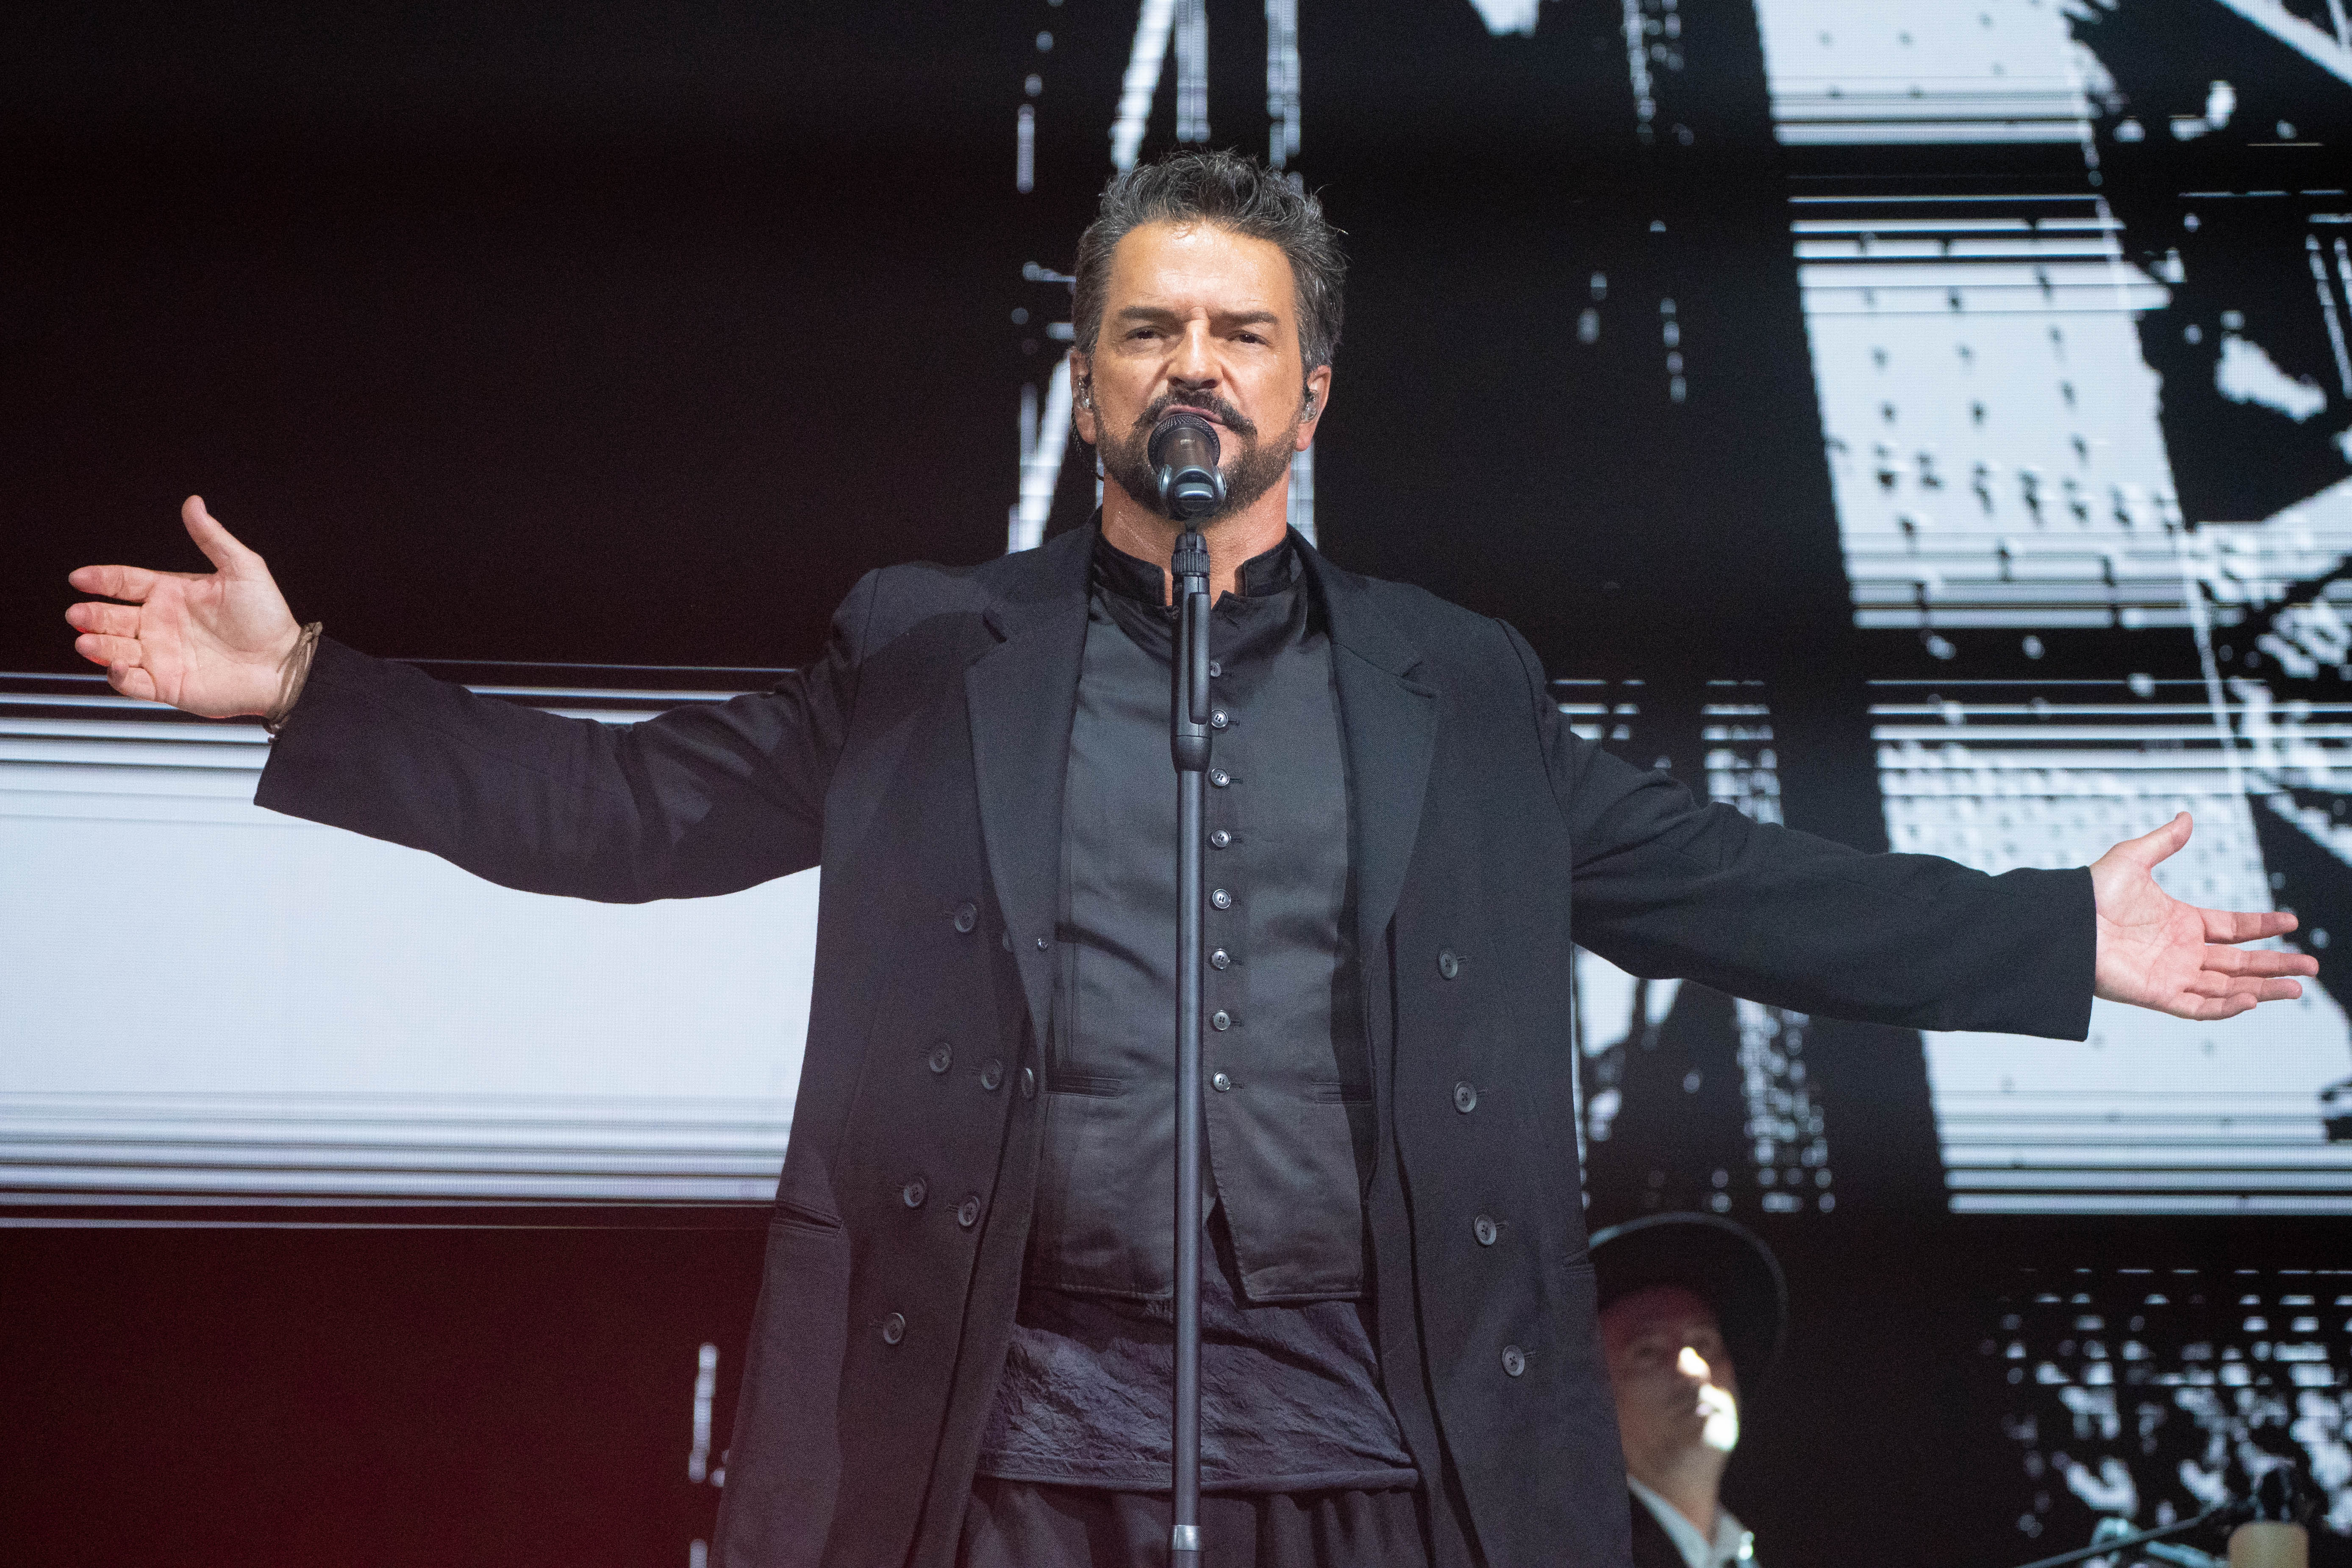 Ricardo Arjona made his fans vibrate for more than two hours  